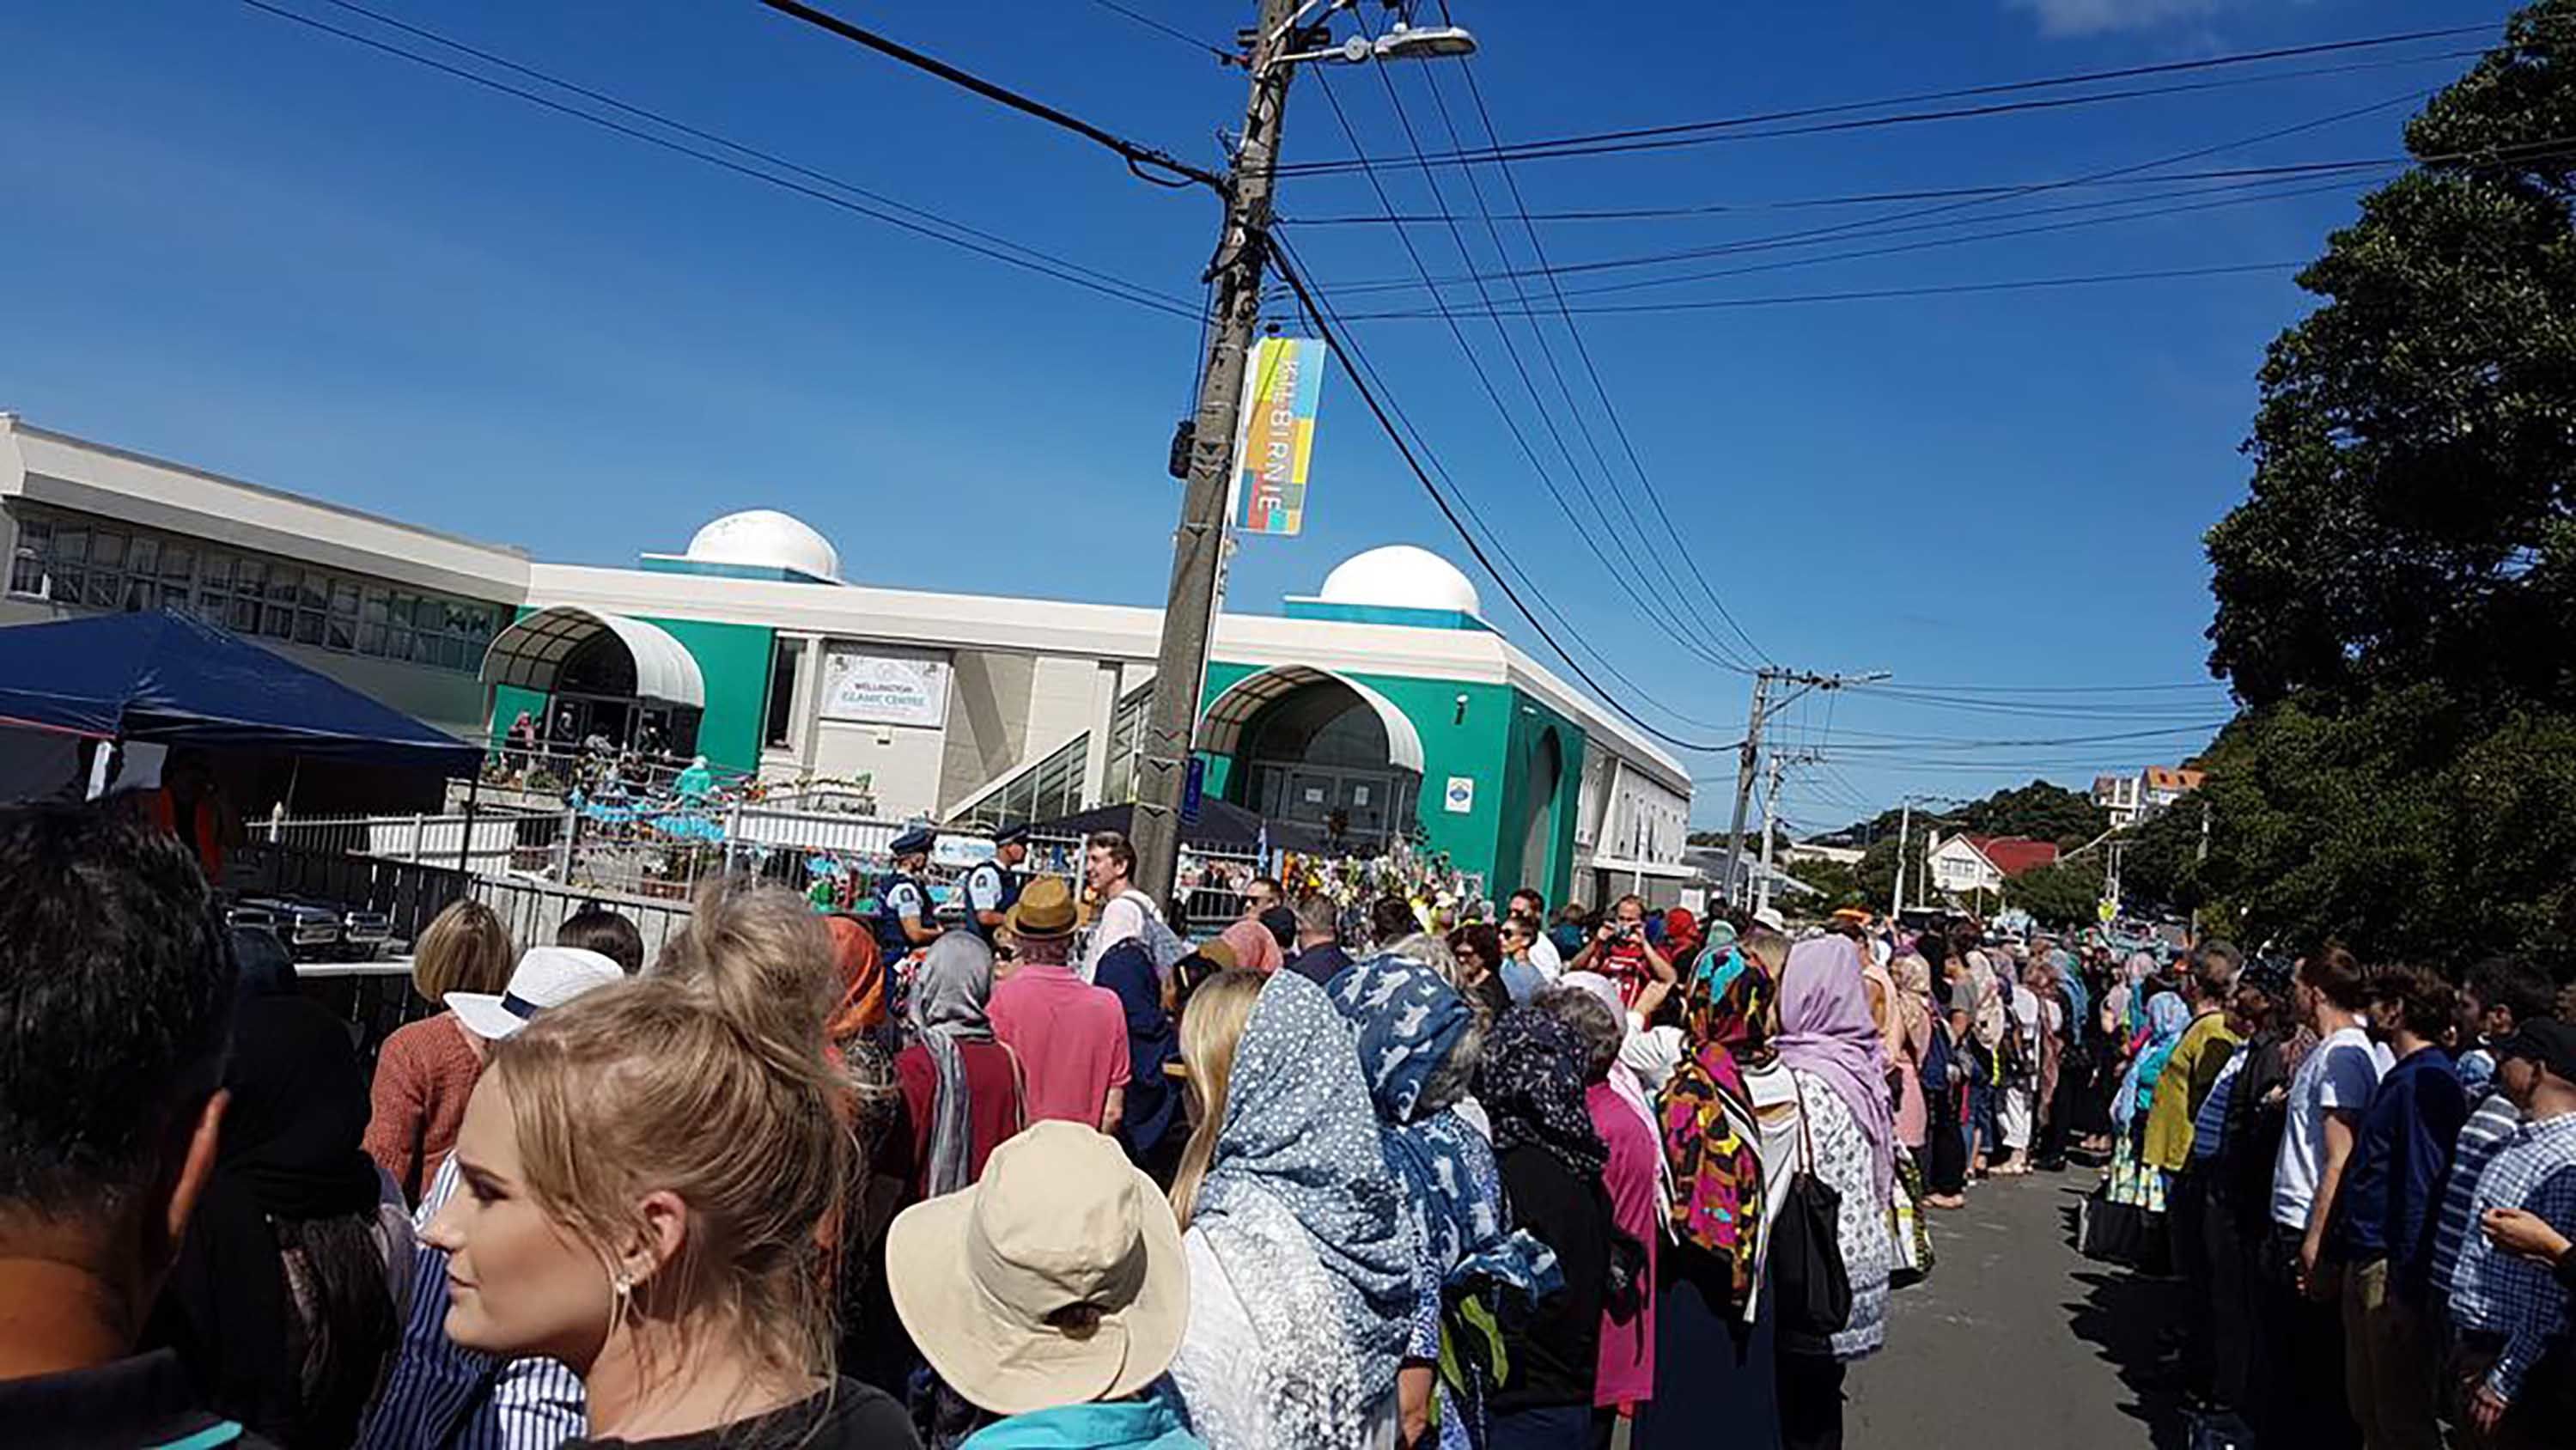 Hundreds of people formed a human chain around the Kilbirnie Mosque in Wellington,  New Zealand on Friday, March 22.